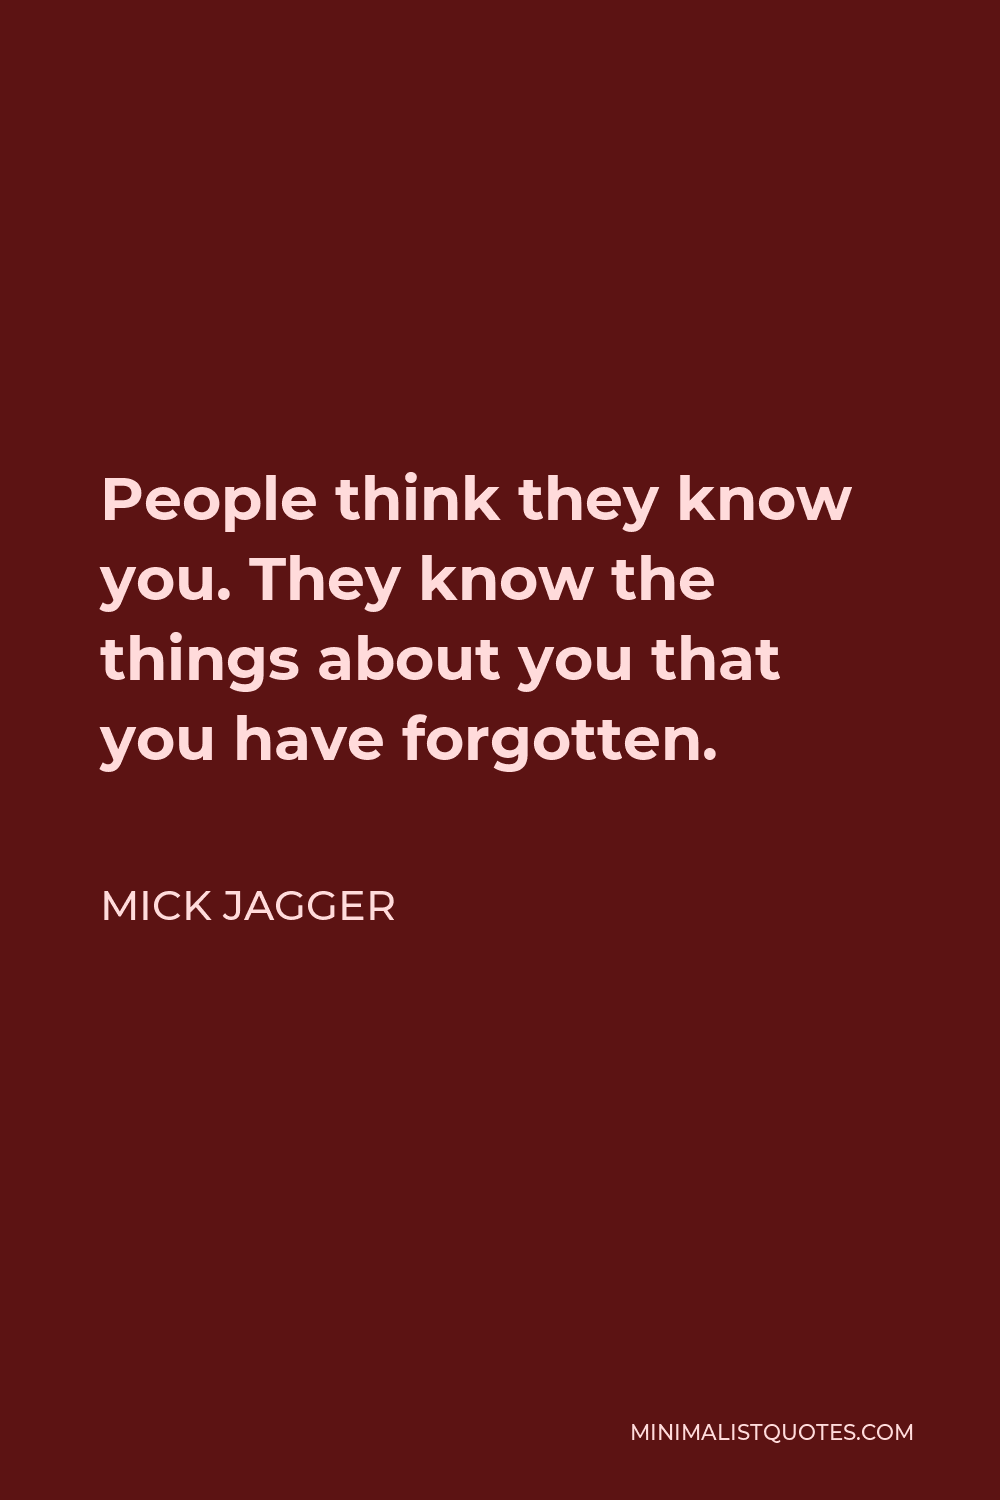 Mick Jagger Quote - People think they know you. They know the things about you that you have forgotten.